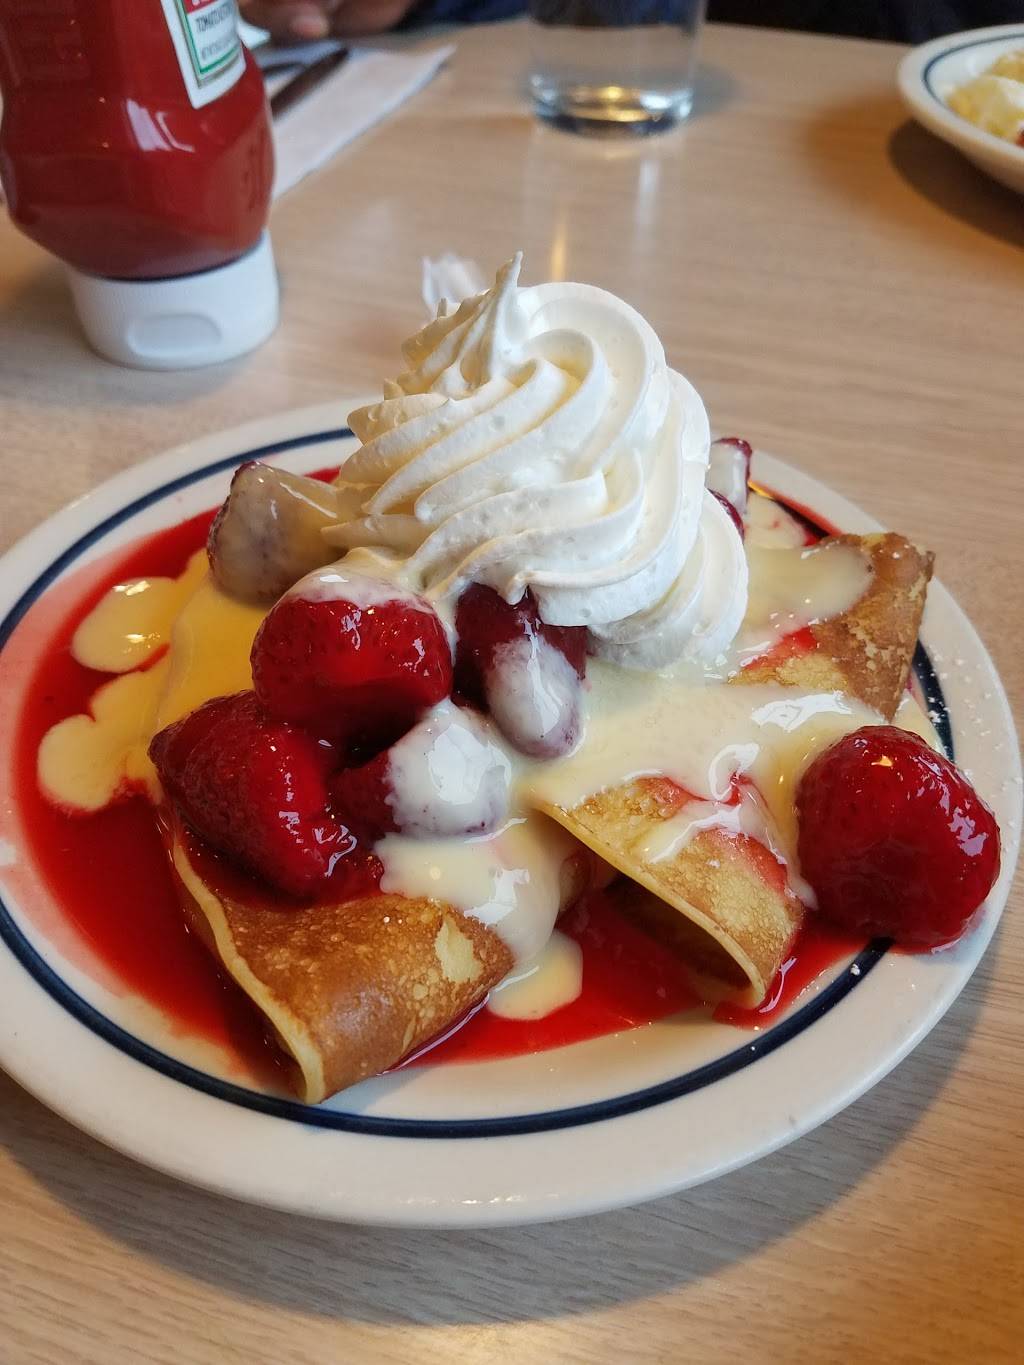 IHOP | restaurant | 2900 SE 164th Ave, Vancouver, WA 98683, USA | 3608963700 OR +1 360-896-3700